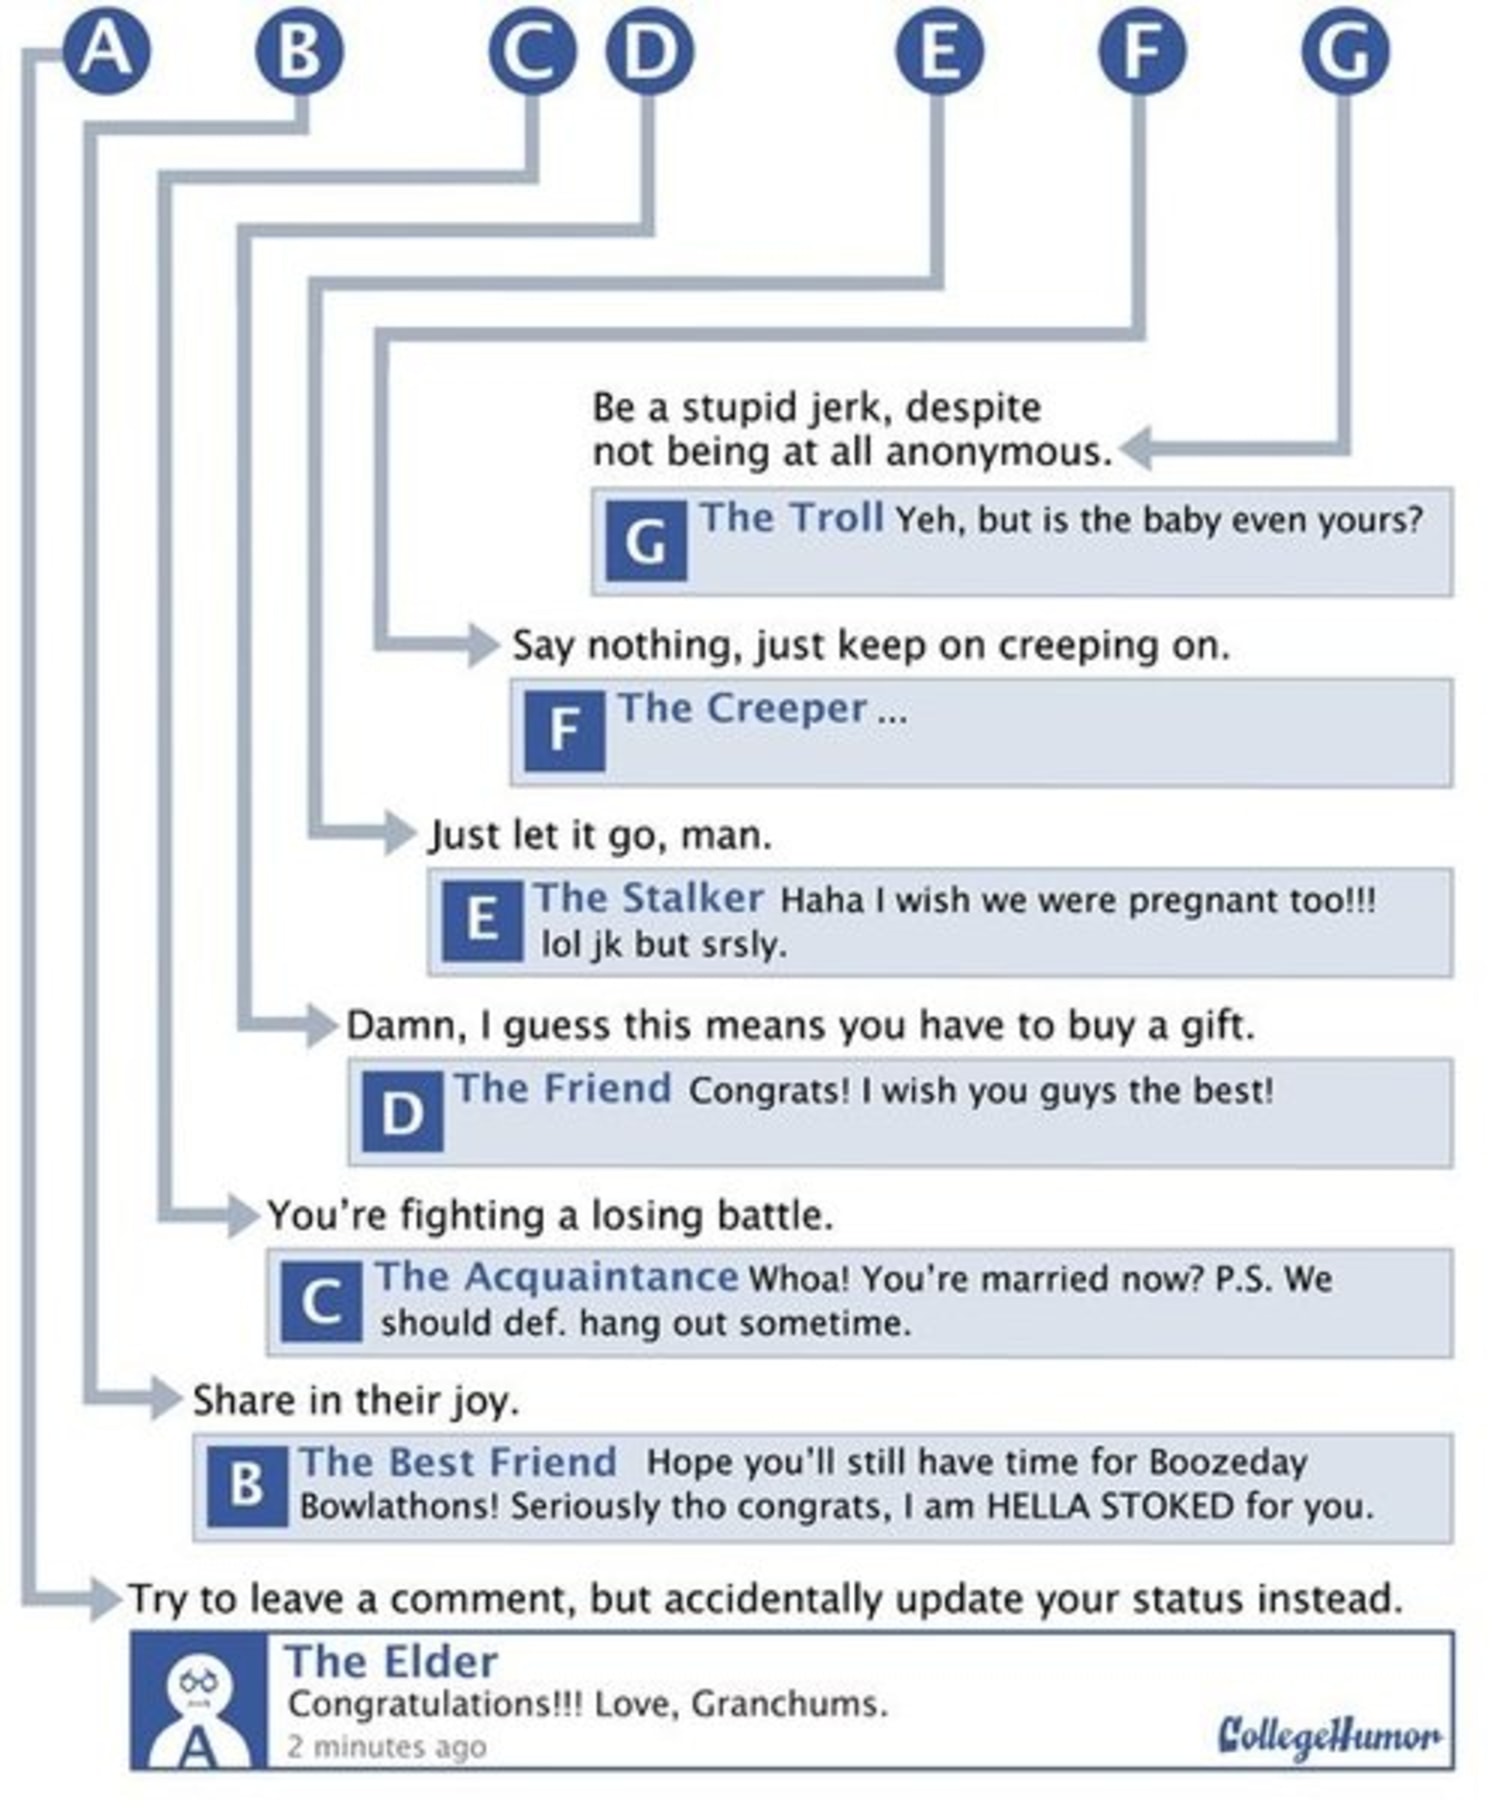 Facebook flowchart clears comment confusion